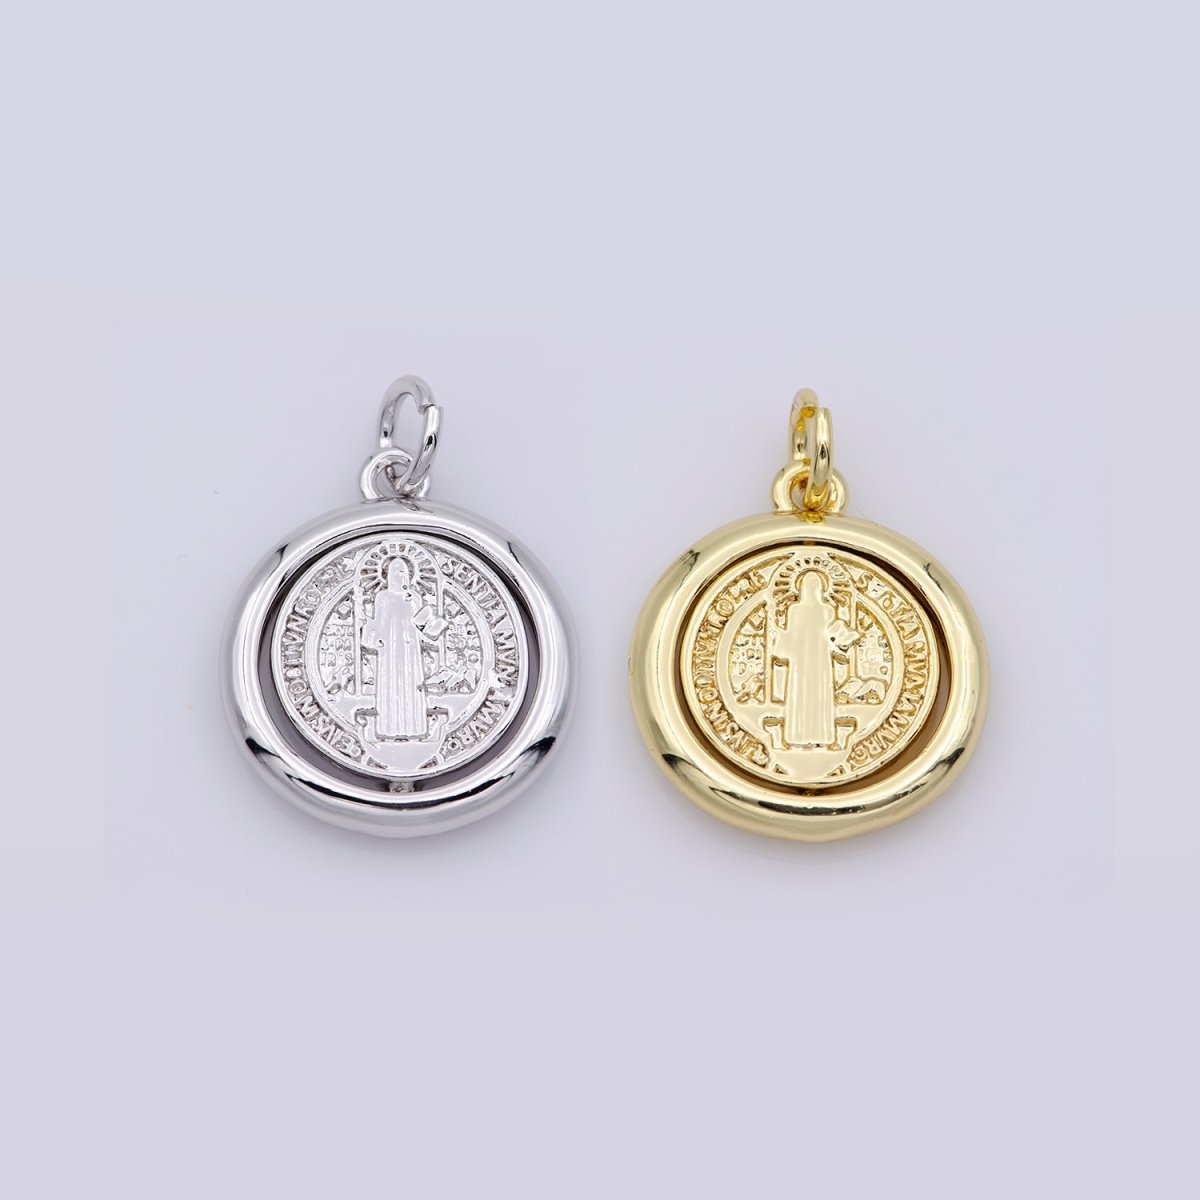 Double Sided Dainty Gold Filled Saint Benedict Charm Pray for You Spinner Pendant for Religious Jewelry Making Inspired M487 - DLUXCA